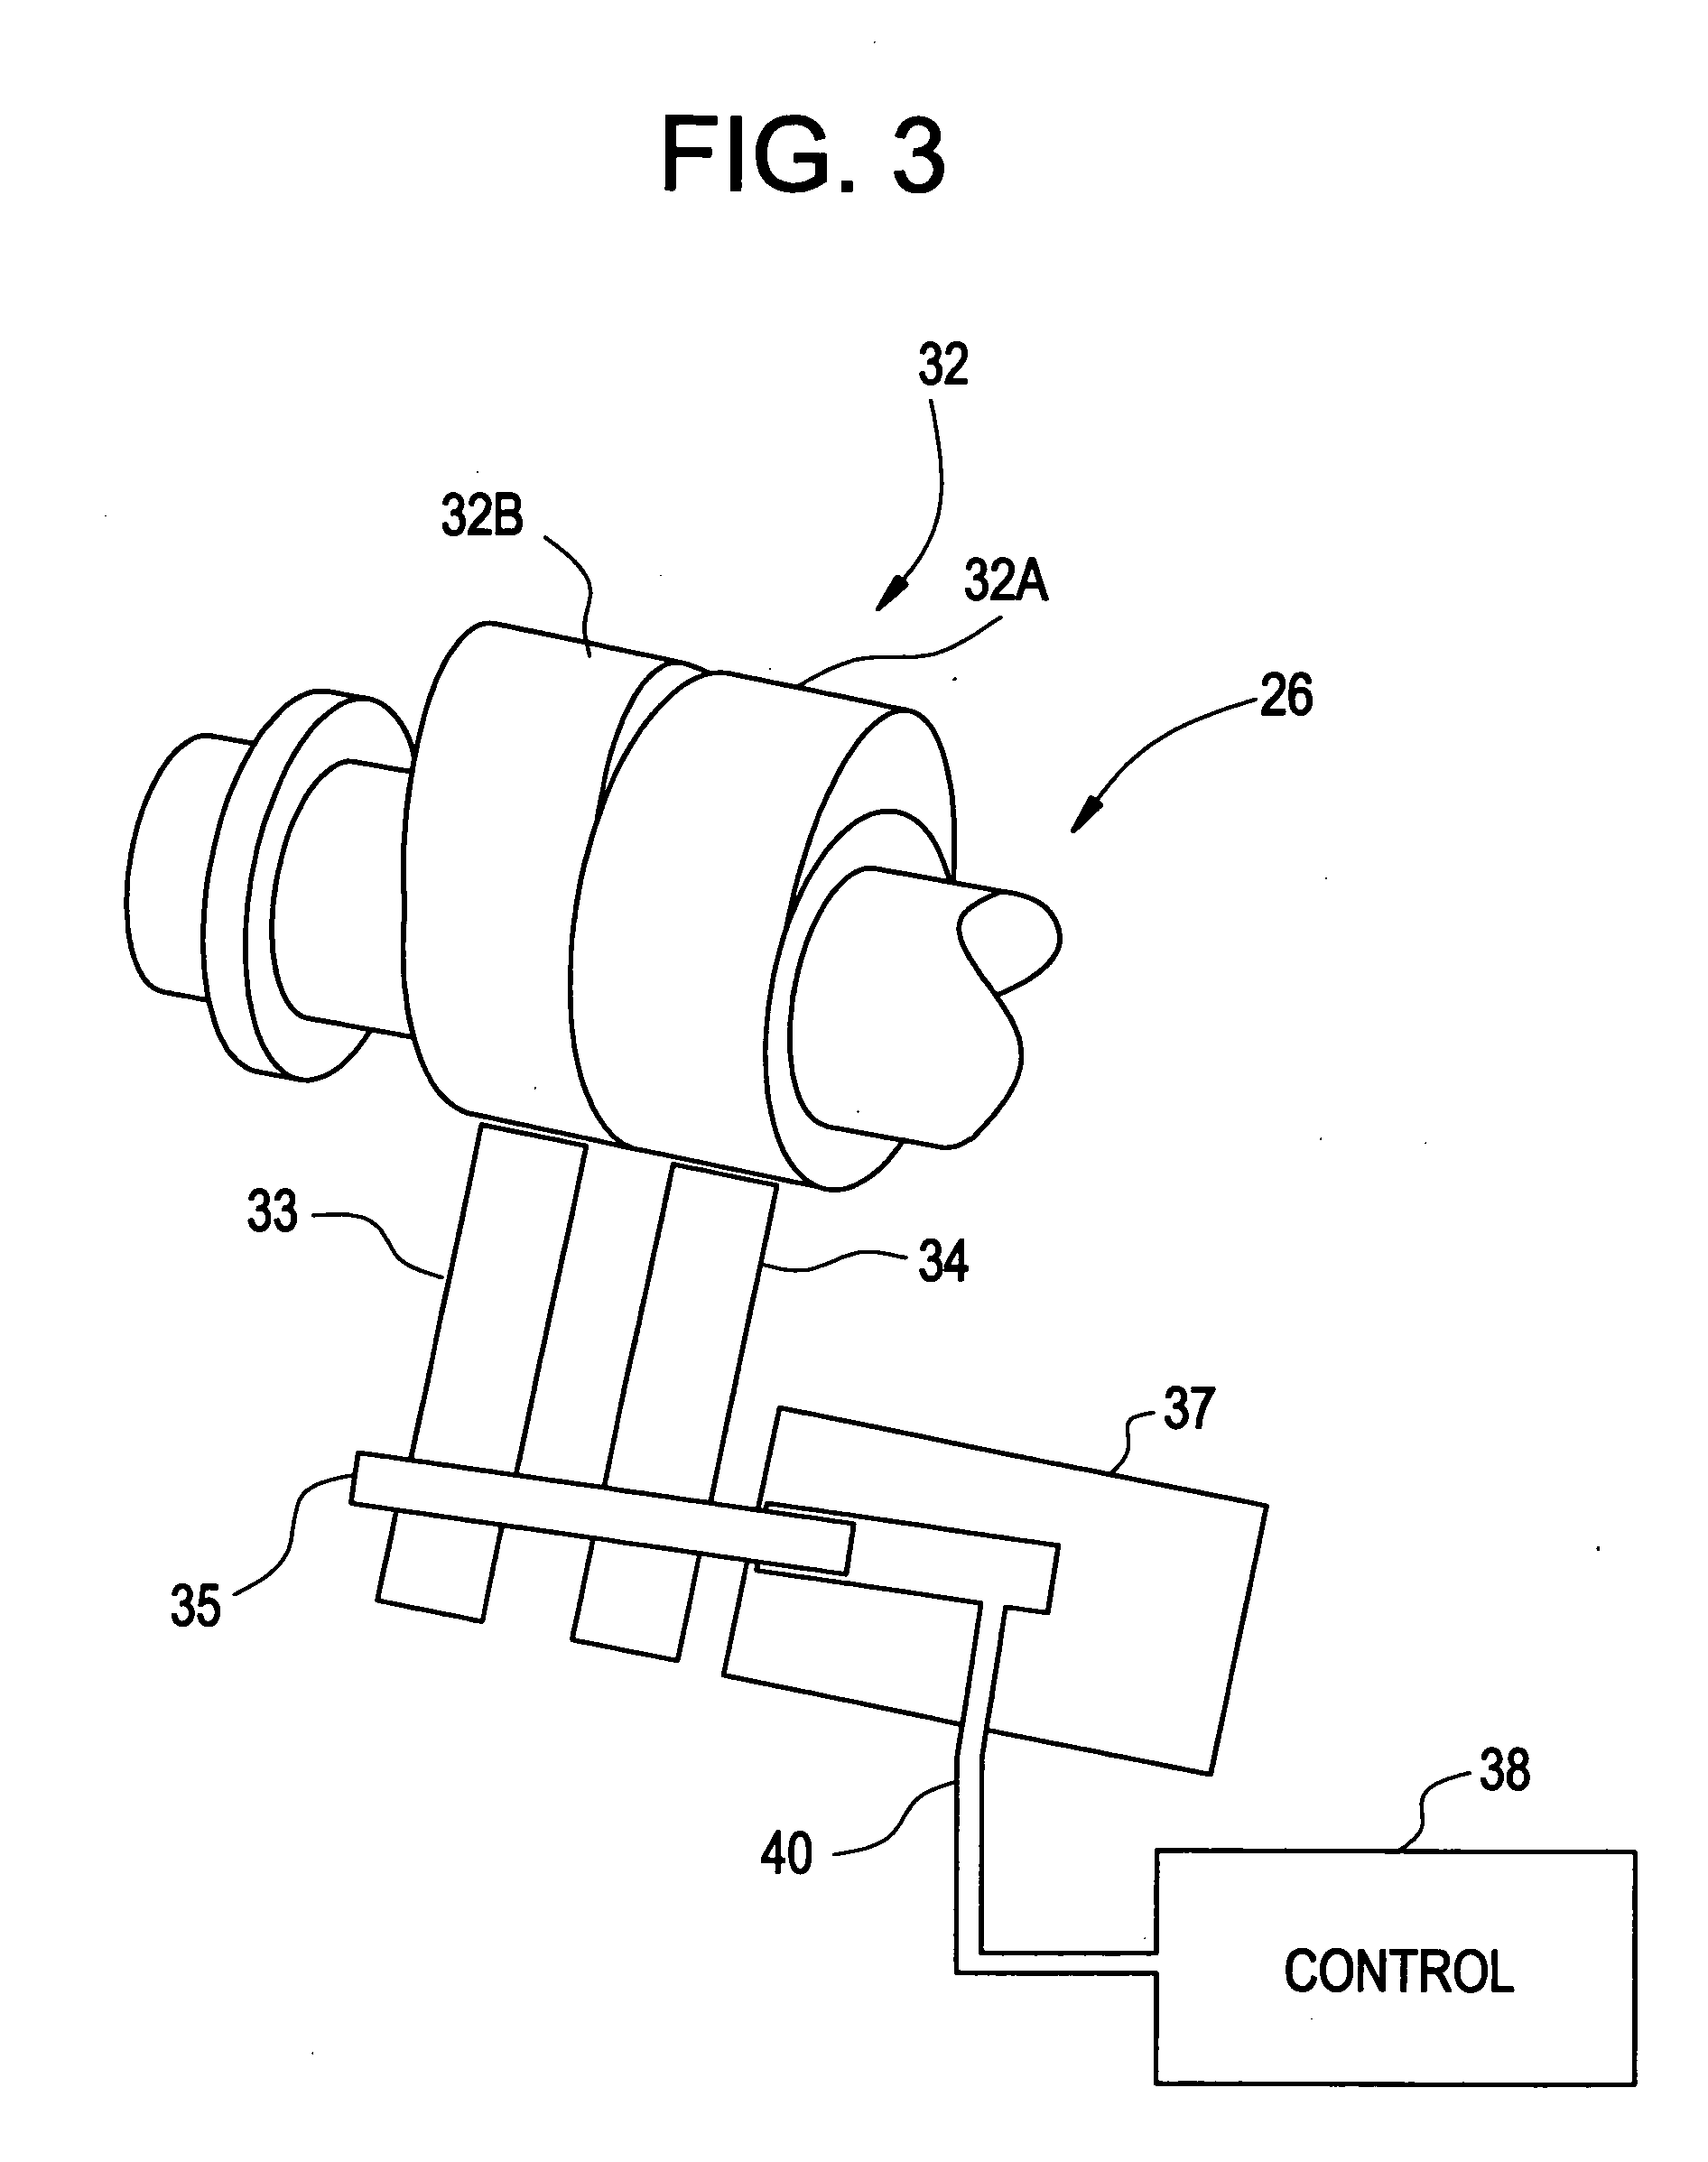 Diesel engine with dual-lobed intake cam for compression ratio control